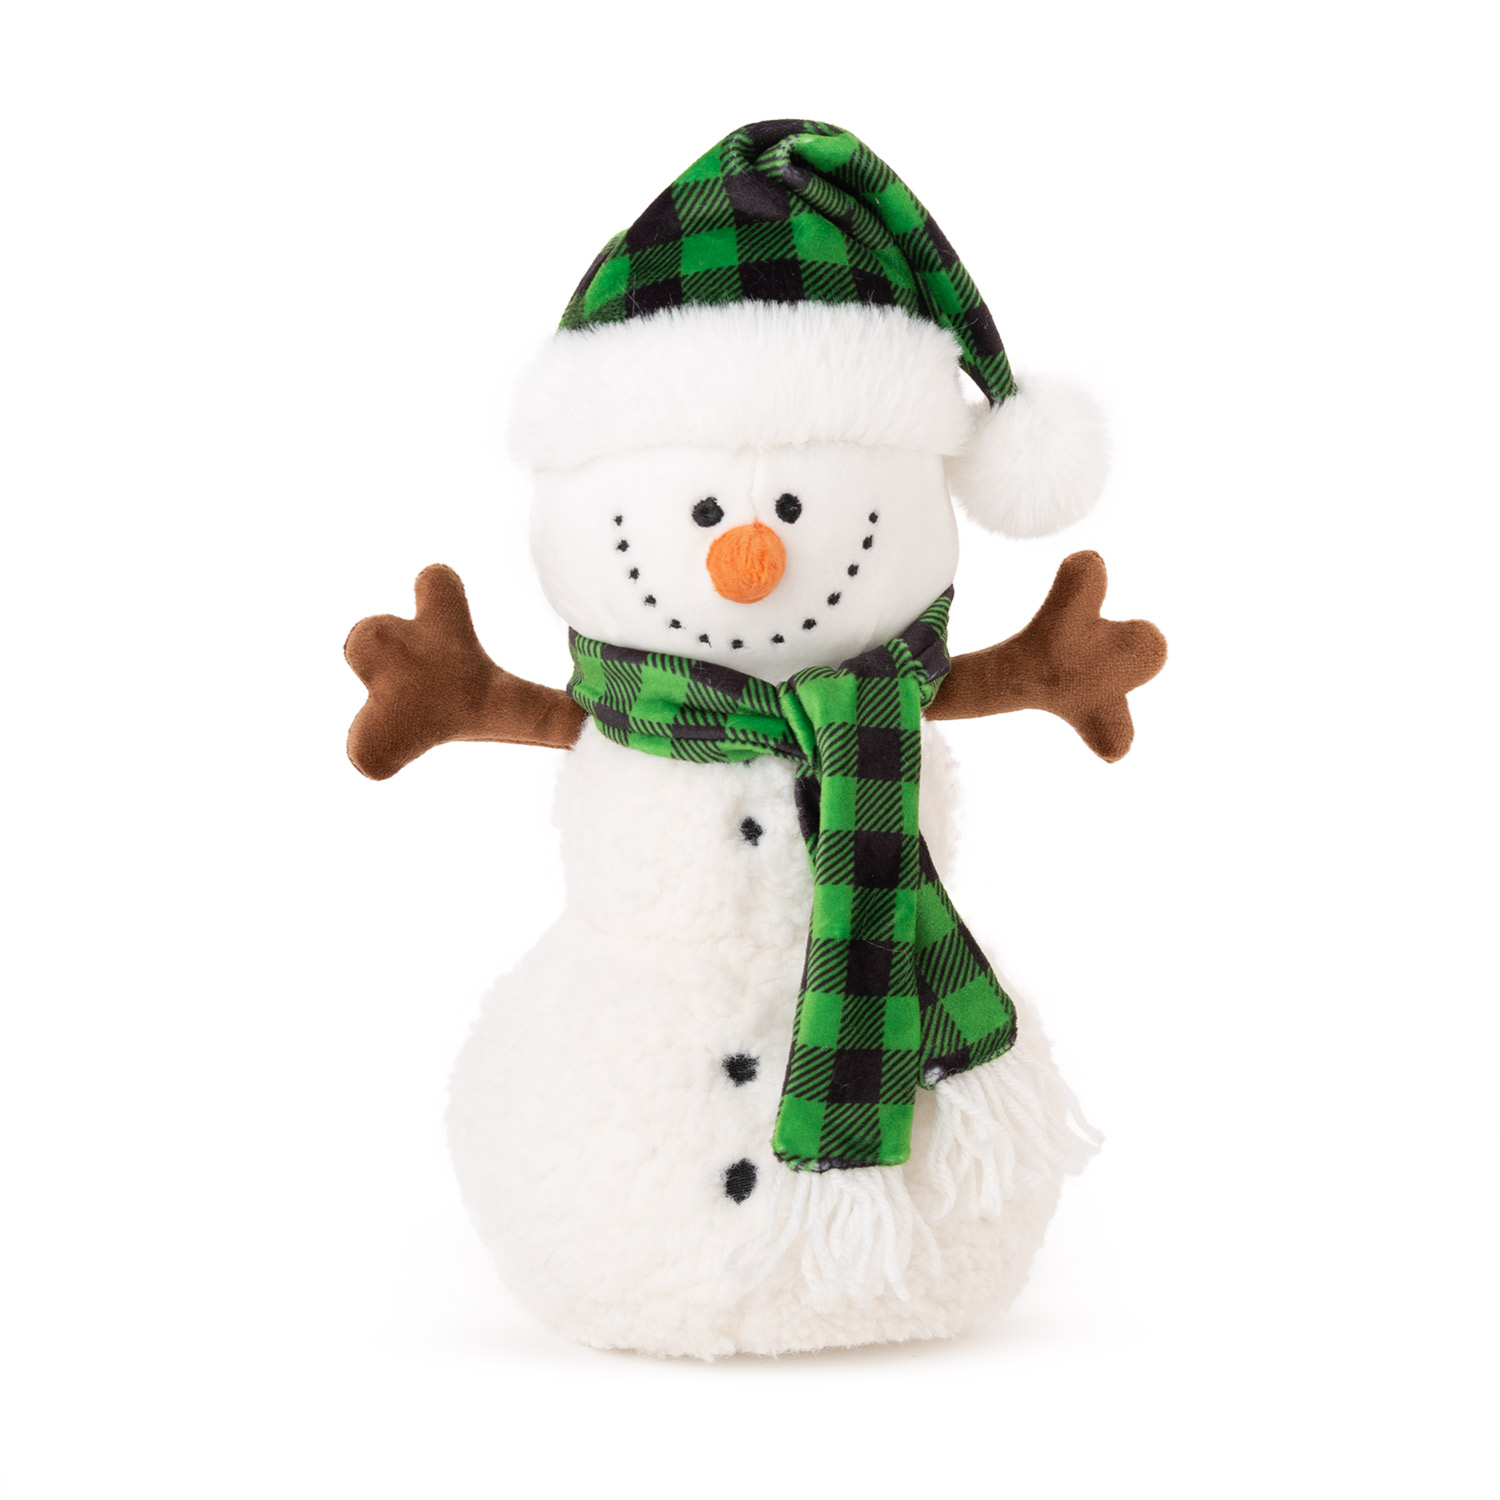 Snowman with hat and scarf - Green